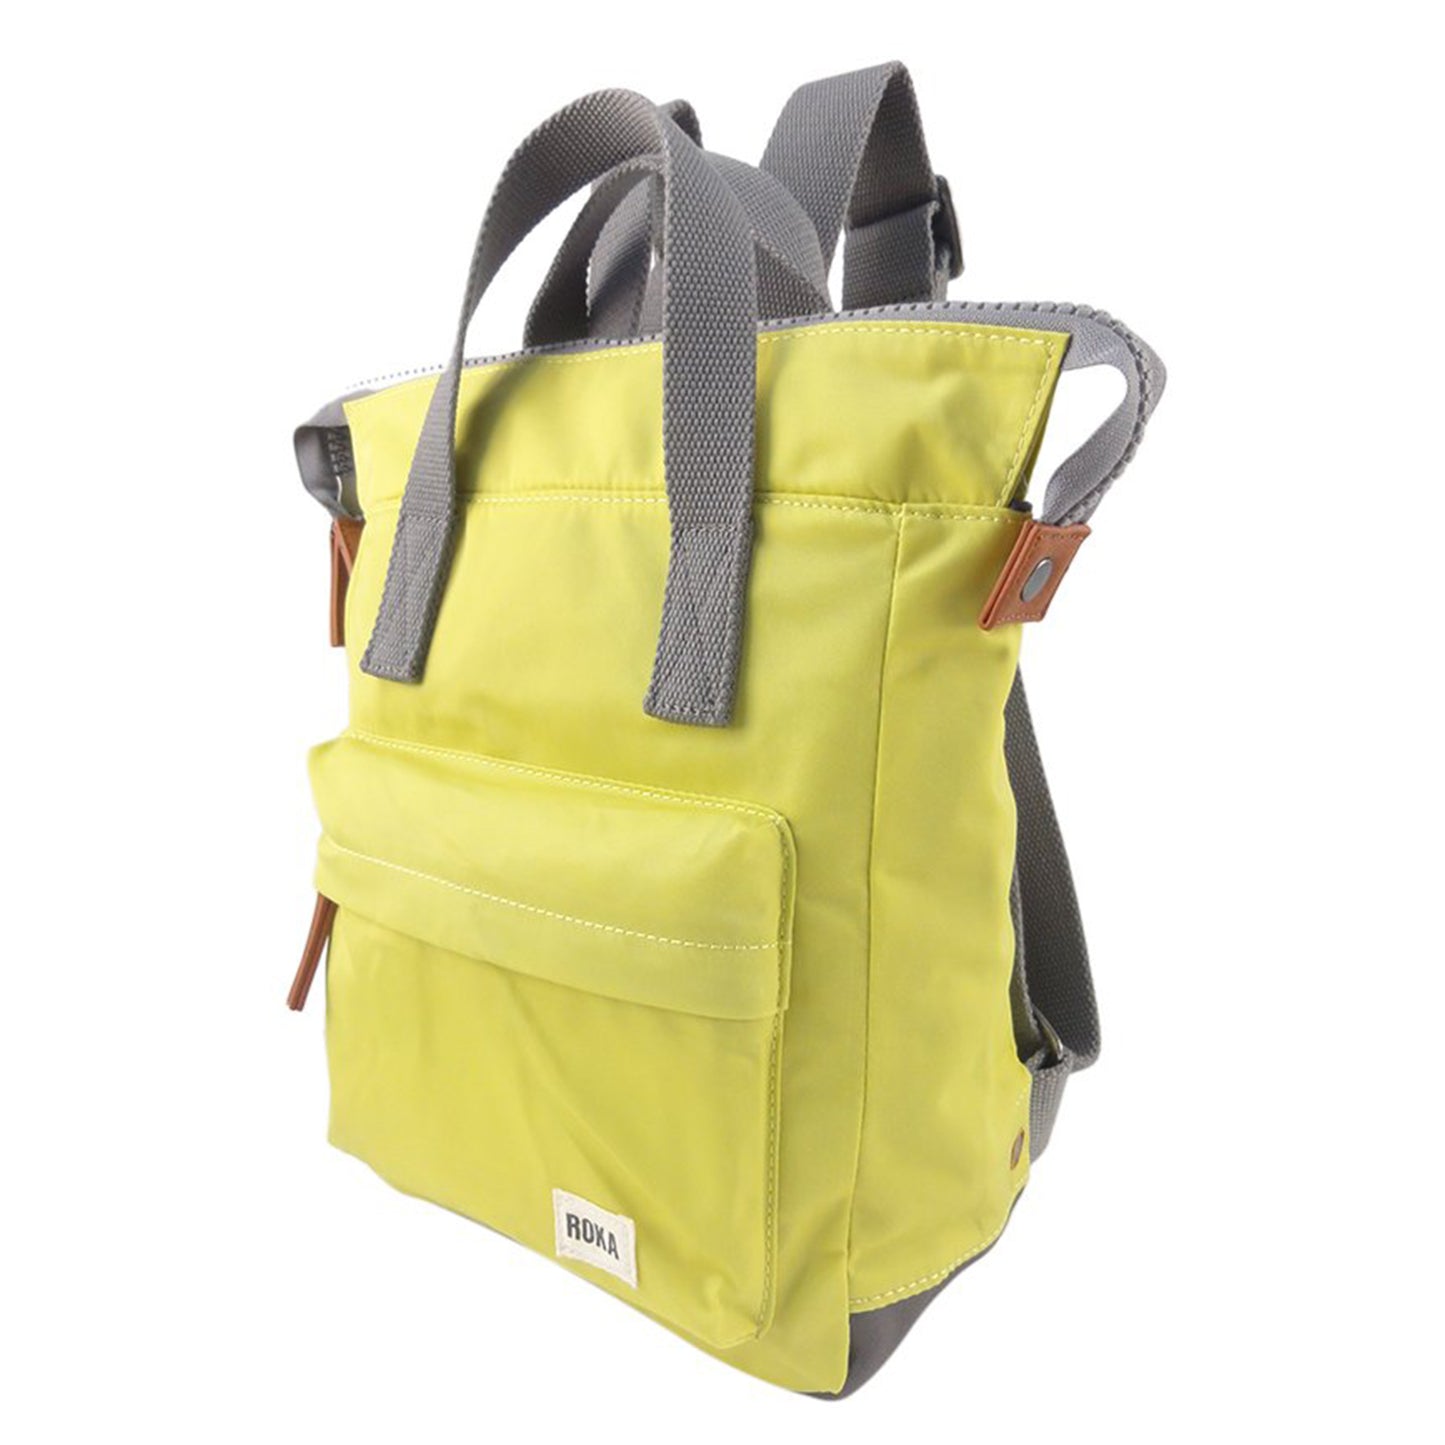 Conker Boutique Roka Bantry B Small Rucksack yellow side view